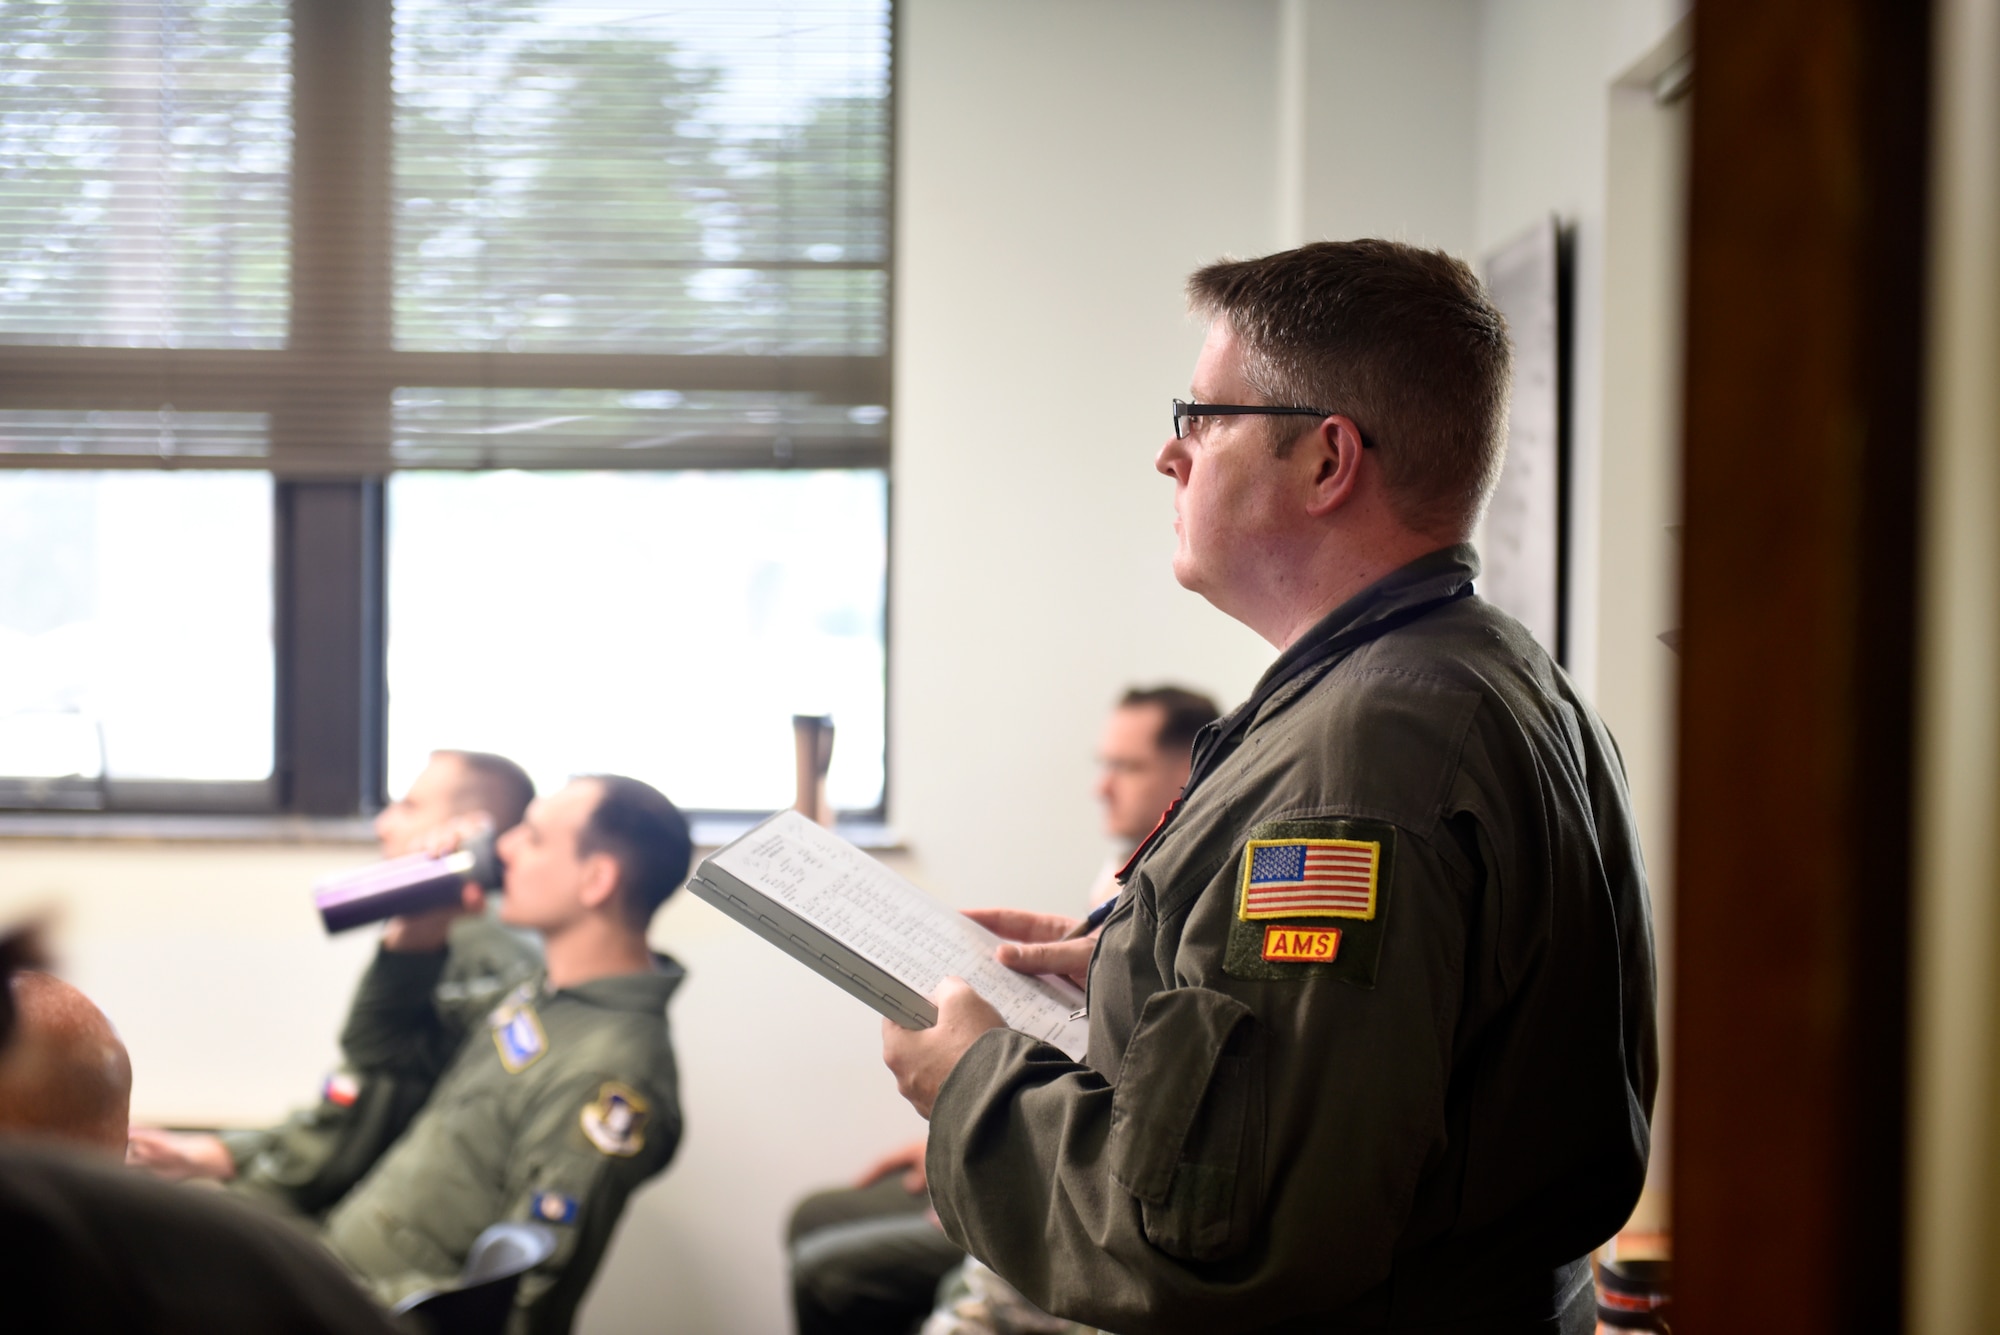 U.S. Air Force Tech. Sgt. Cody Niemi, 97th Intelligence Squadron, listens to a  preflight briefing before departing for a weekend training sortie at Offutt Air Force Base, Nebraska Aug. 5, 2018. The objective of the briefing is to communicate a common operating picture of meteorological and aeronautical information to the entire crew necessary for the conduct of a safe and efficient flight. (U.S. Air Force photo by 2nd Lt. Drew Nystrom)